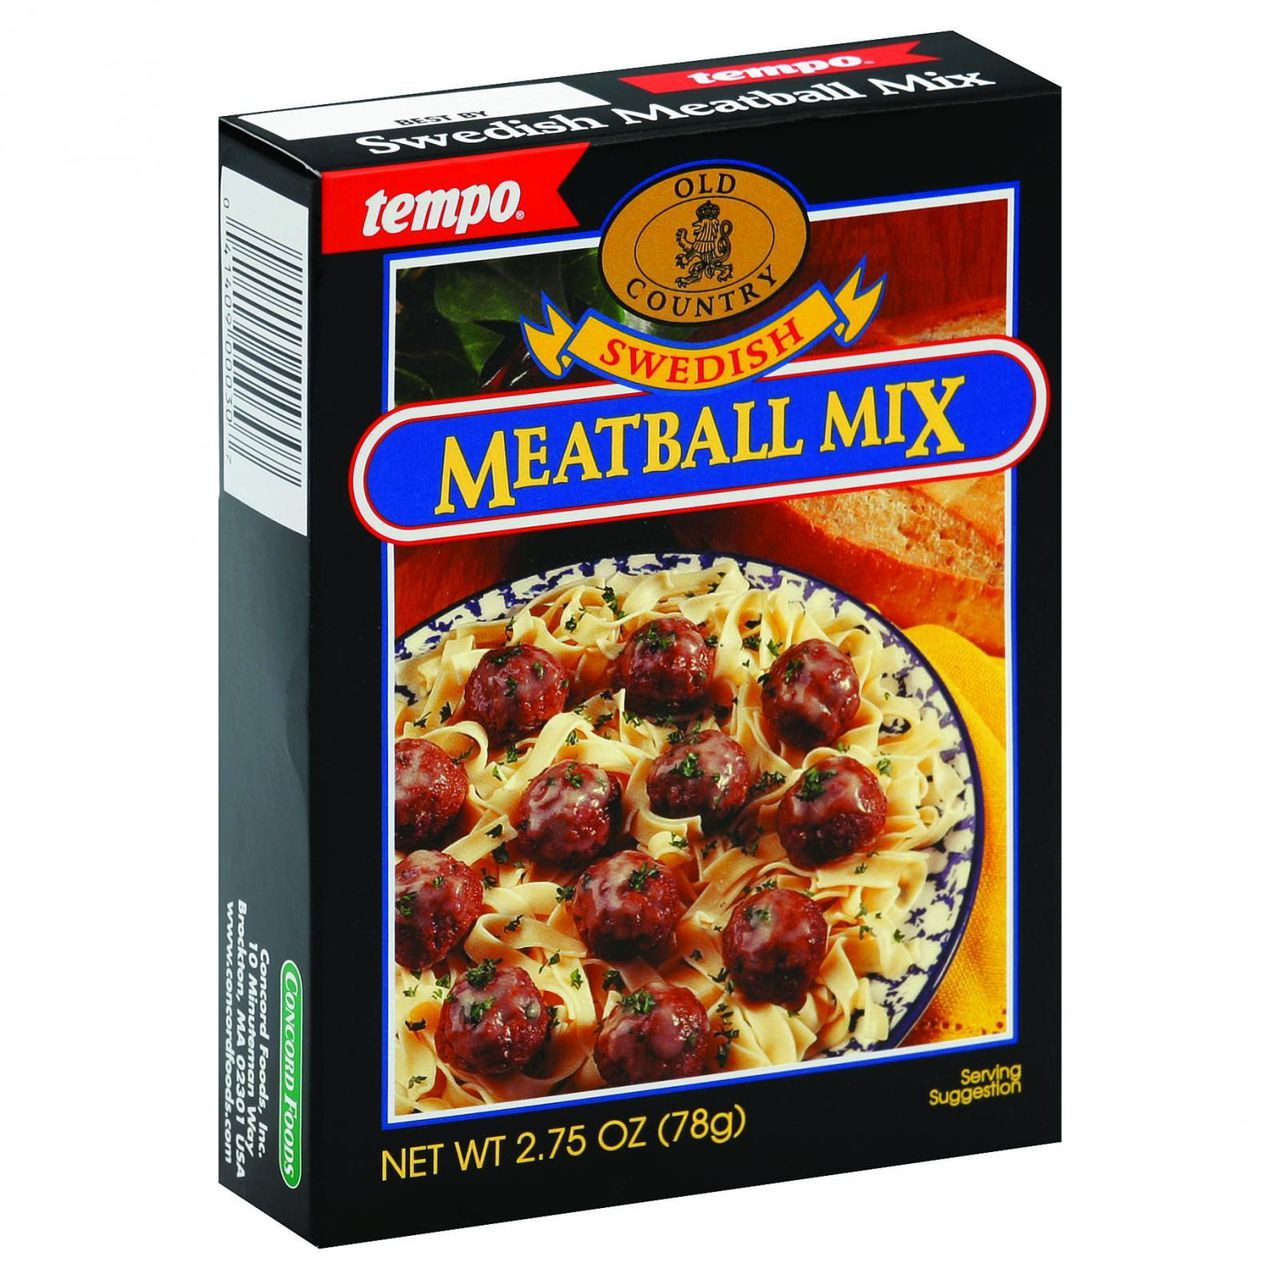 Tempo Old Country Meatball Mix - Swedish - 2.75 oz - Case of 12, Case of 12  - 2.75 OZ each - Kroger